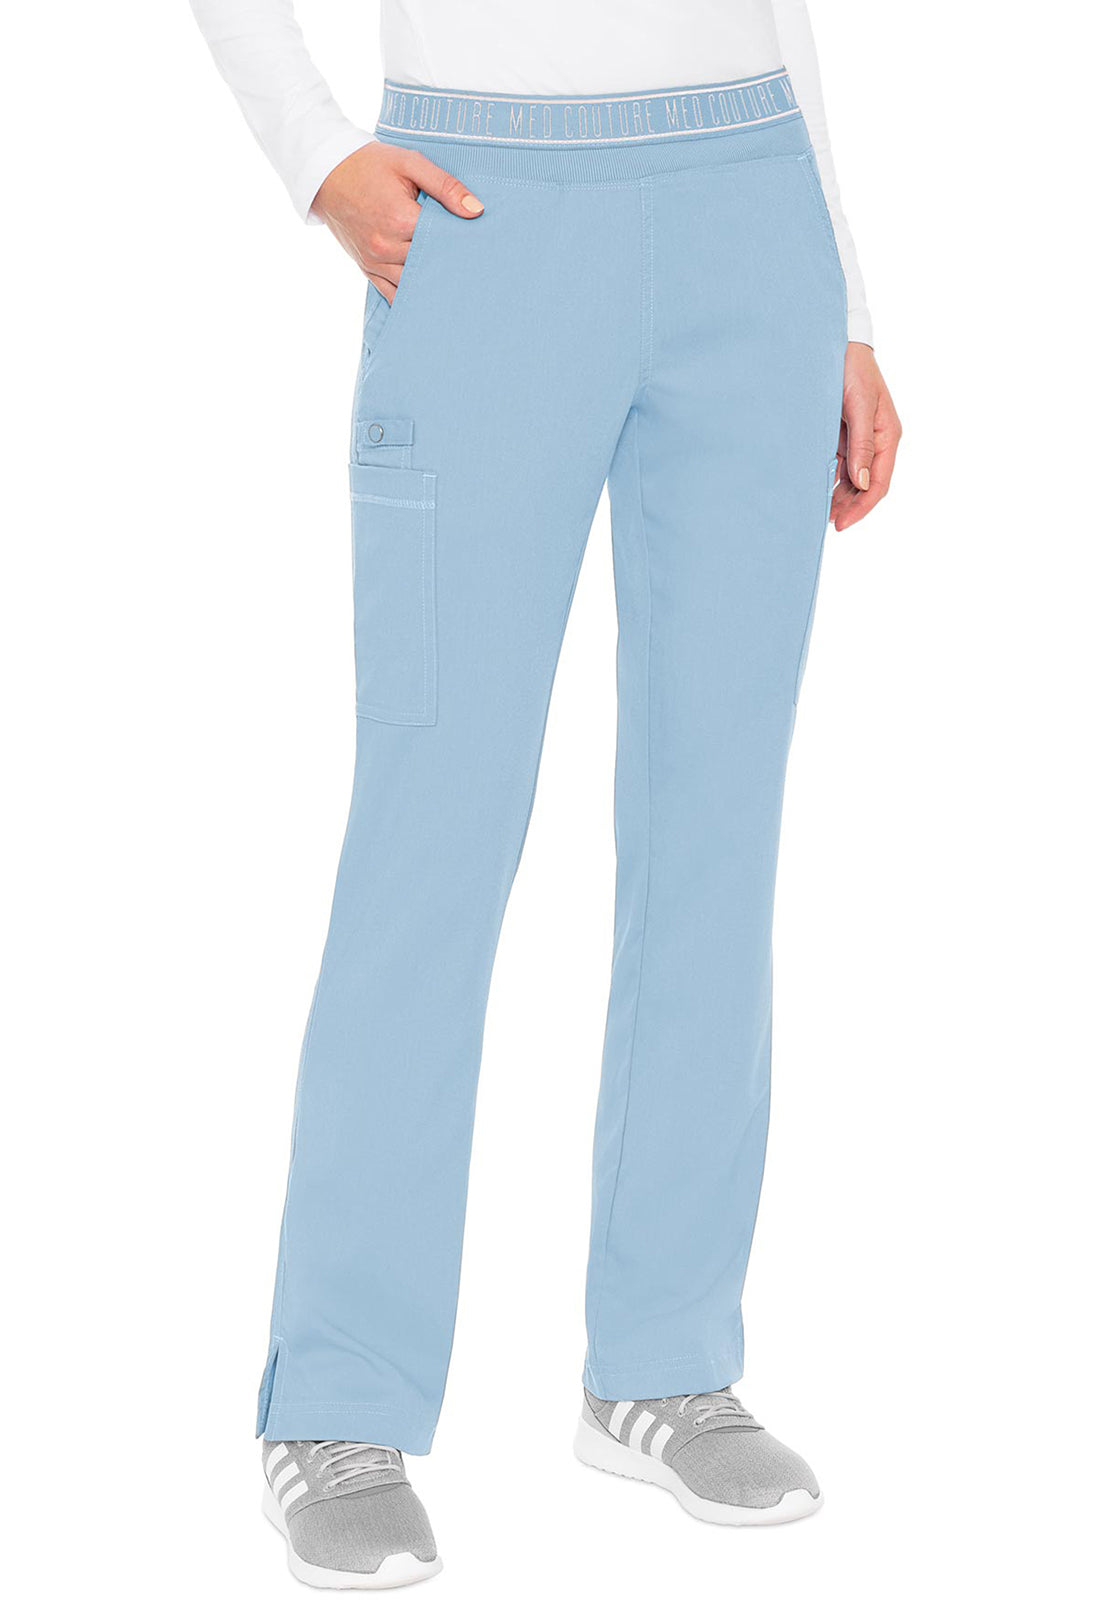 Med Couture Touch Yoga 2 Cargo Pocket Pant (16 Colors XS-2XL Petite Length)